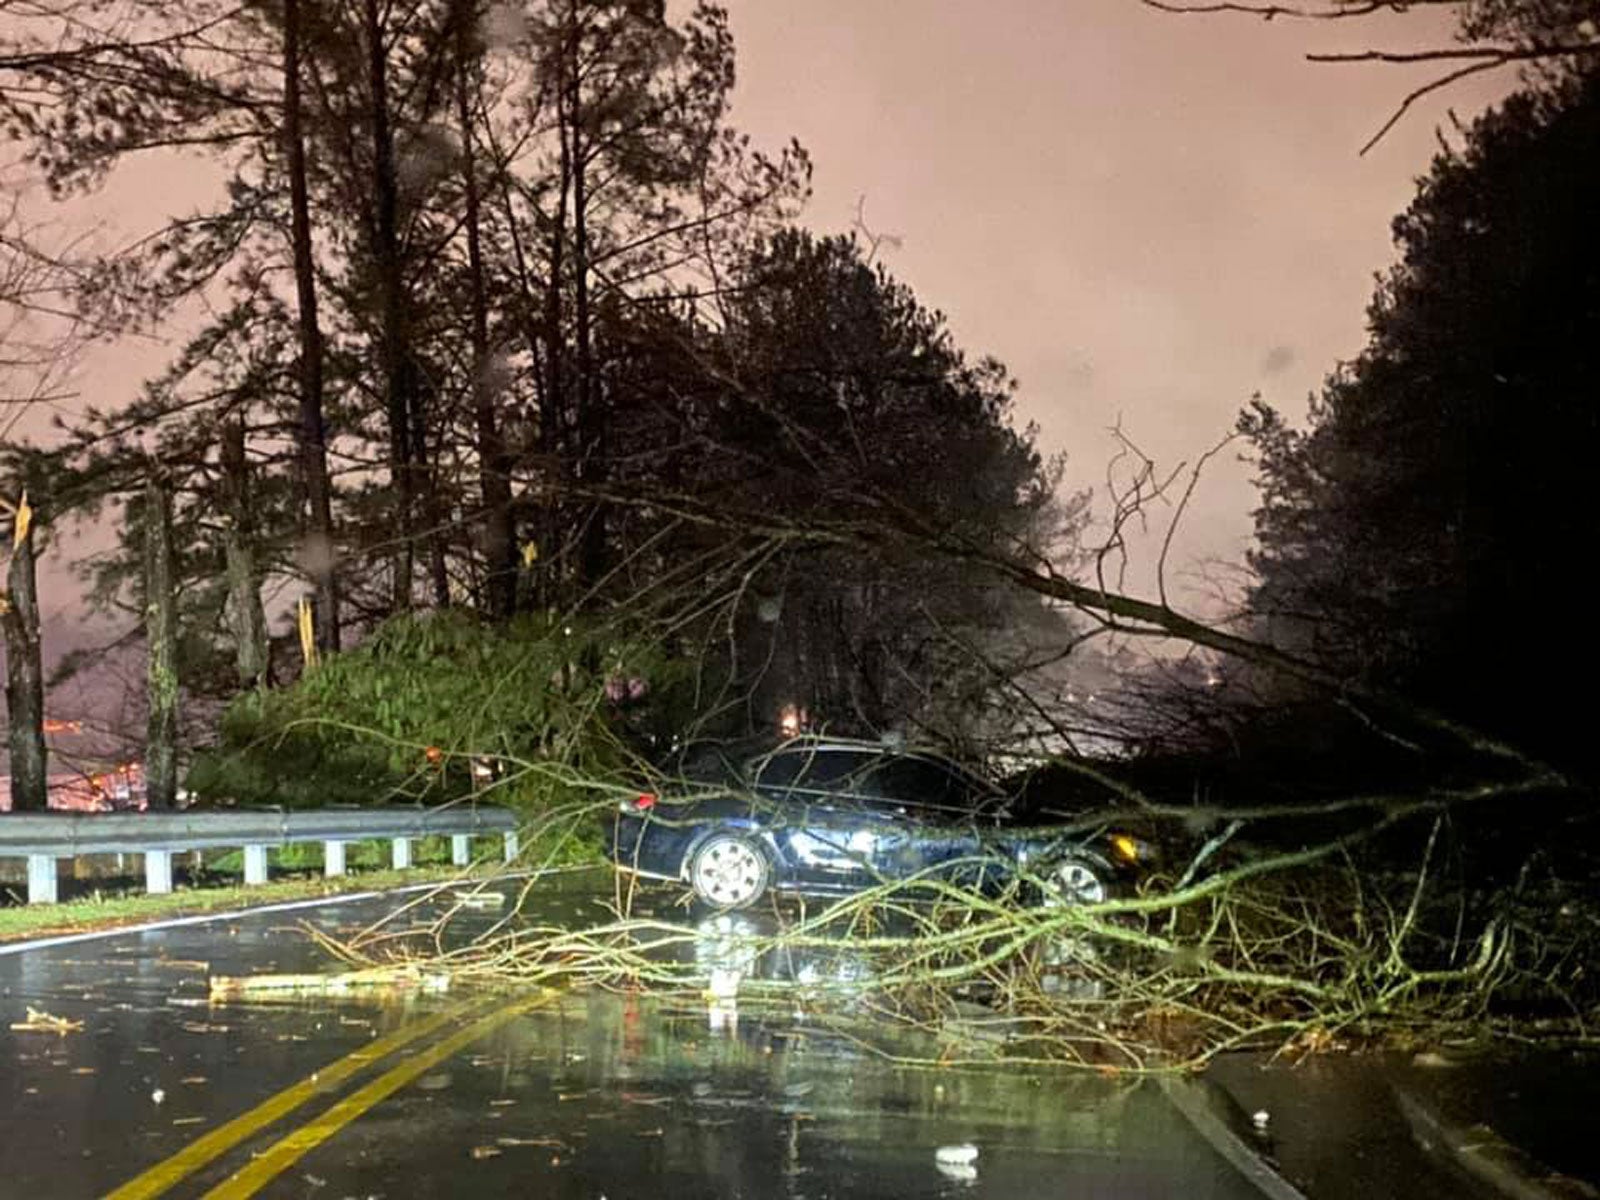 At least 1 killed, nearly 30 injured after large tornado in Alabama - WISH-TV | Indianapolis News | Indiana Weather | Indiana Traffic